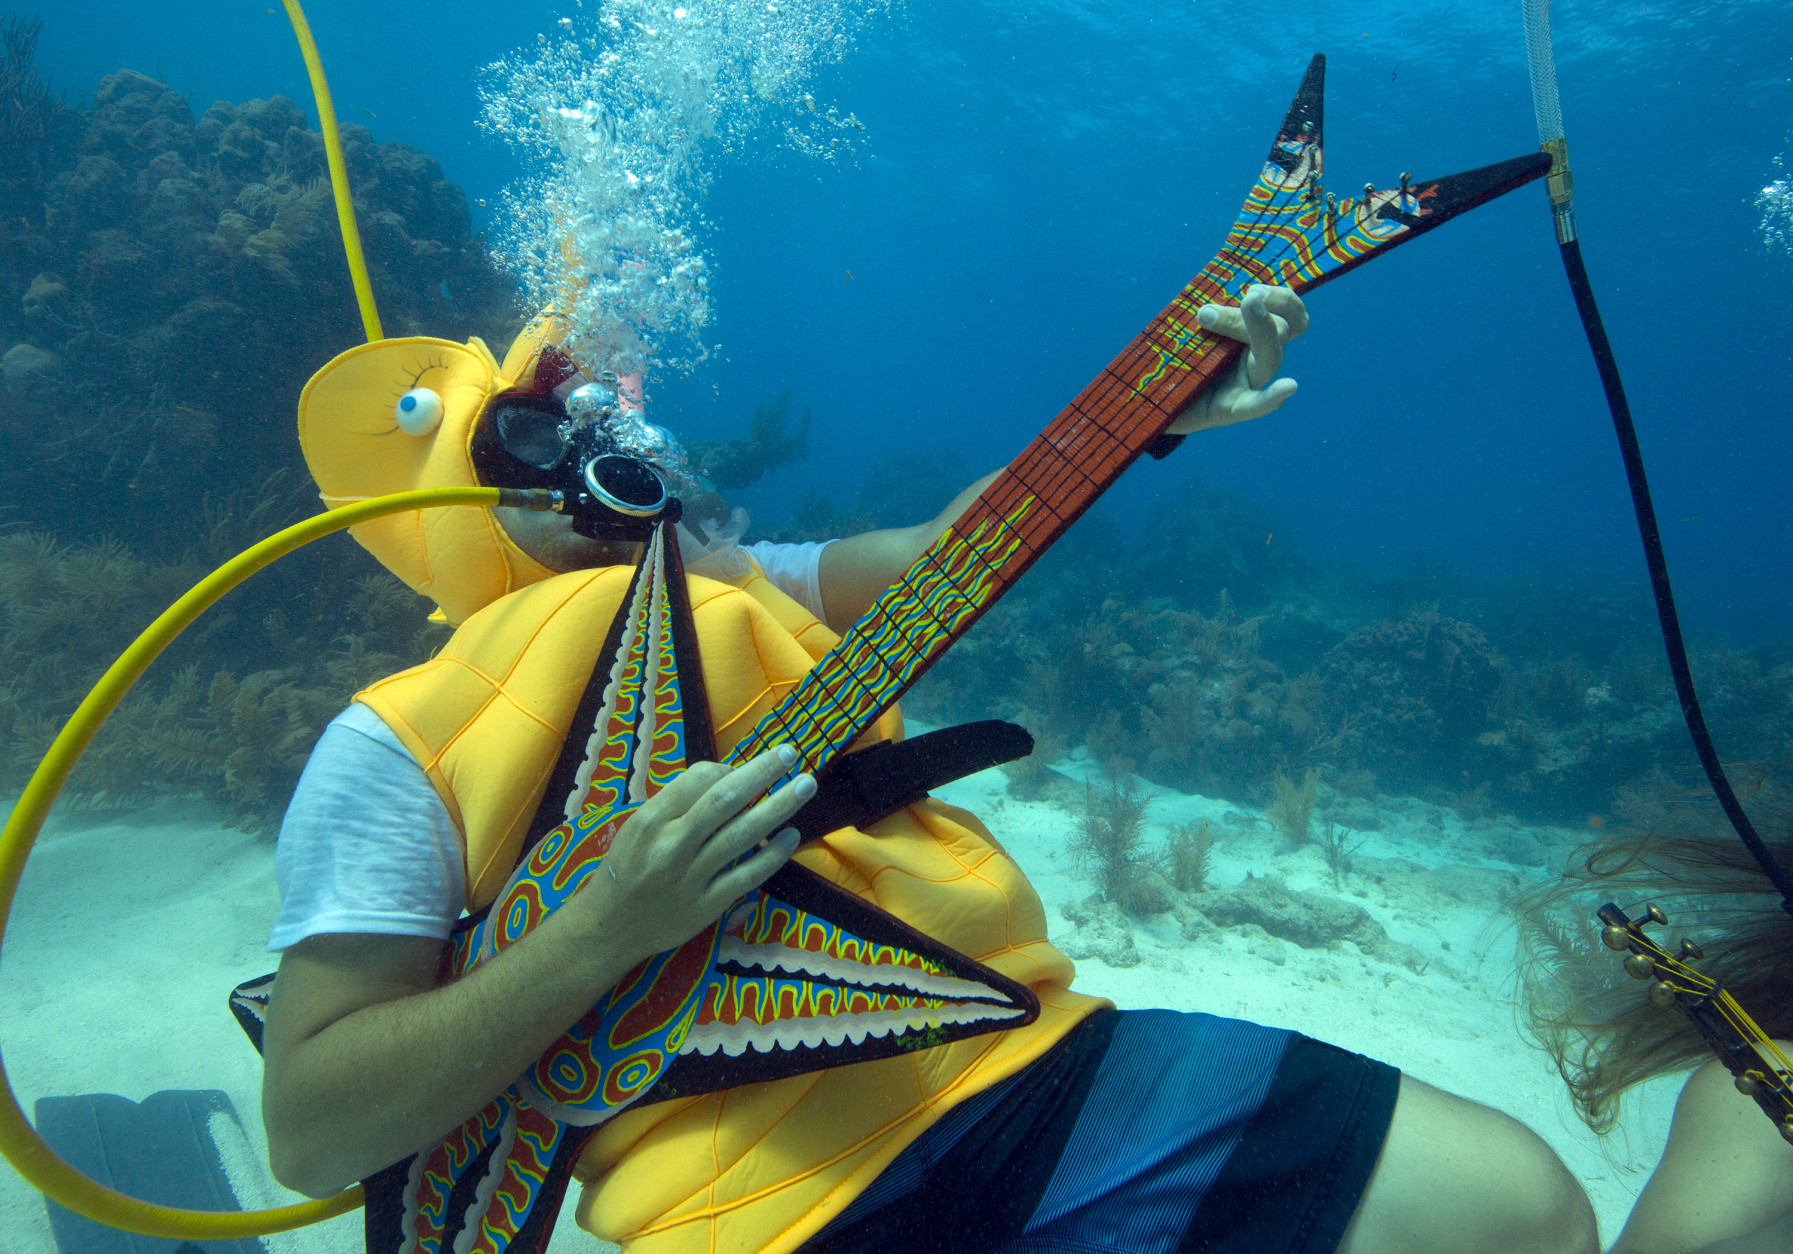 In this photo provided by the Florida Keys News Bureau, Jeff Wright, costumed as a seahorse, rocks with a fake guitar, Saturday, July 11, 2015, during the Underwater Music Festival in the Florida Keys National Marine Sanctuary off Big Pine Key, Fla. The annual event attracted hundreds of divers and snorkelers who listened to a local radio station's four-hour broadcast piped beneath the sea via underwater speakers, featuring music programmed for the subsea listening experience as well as coral reef conservation messages. (Bob Care/Florida Keys News Bureau via AP)